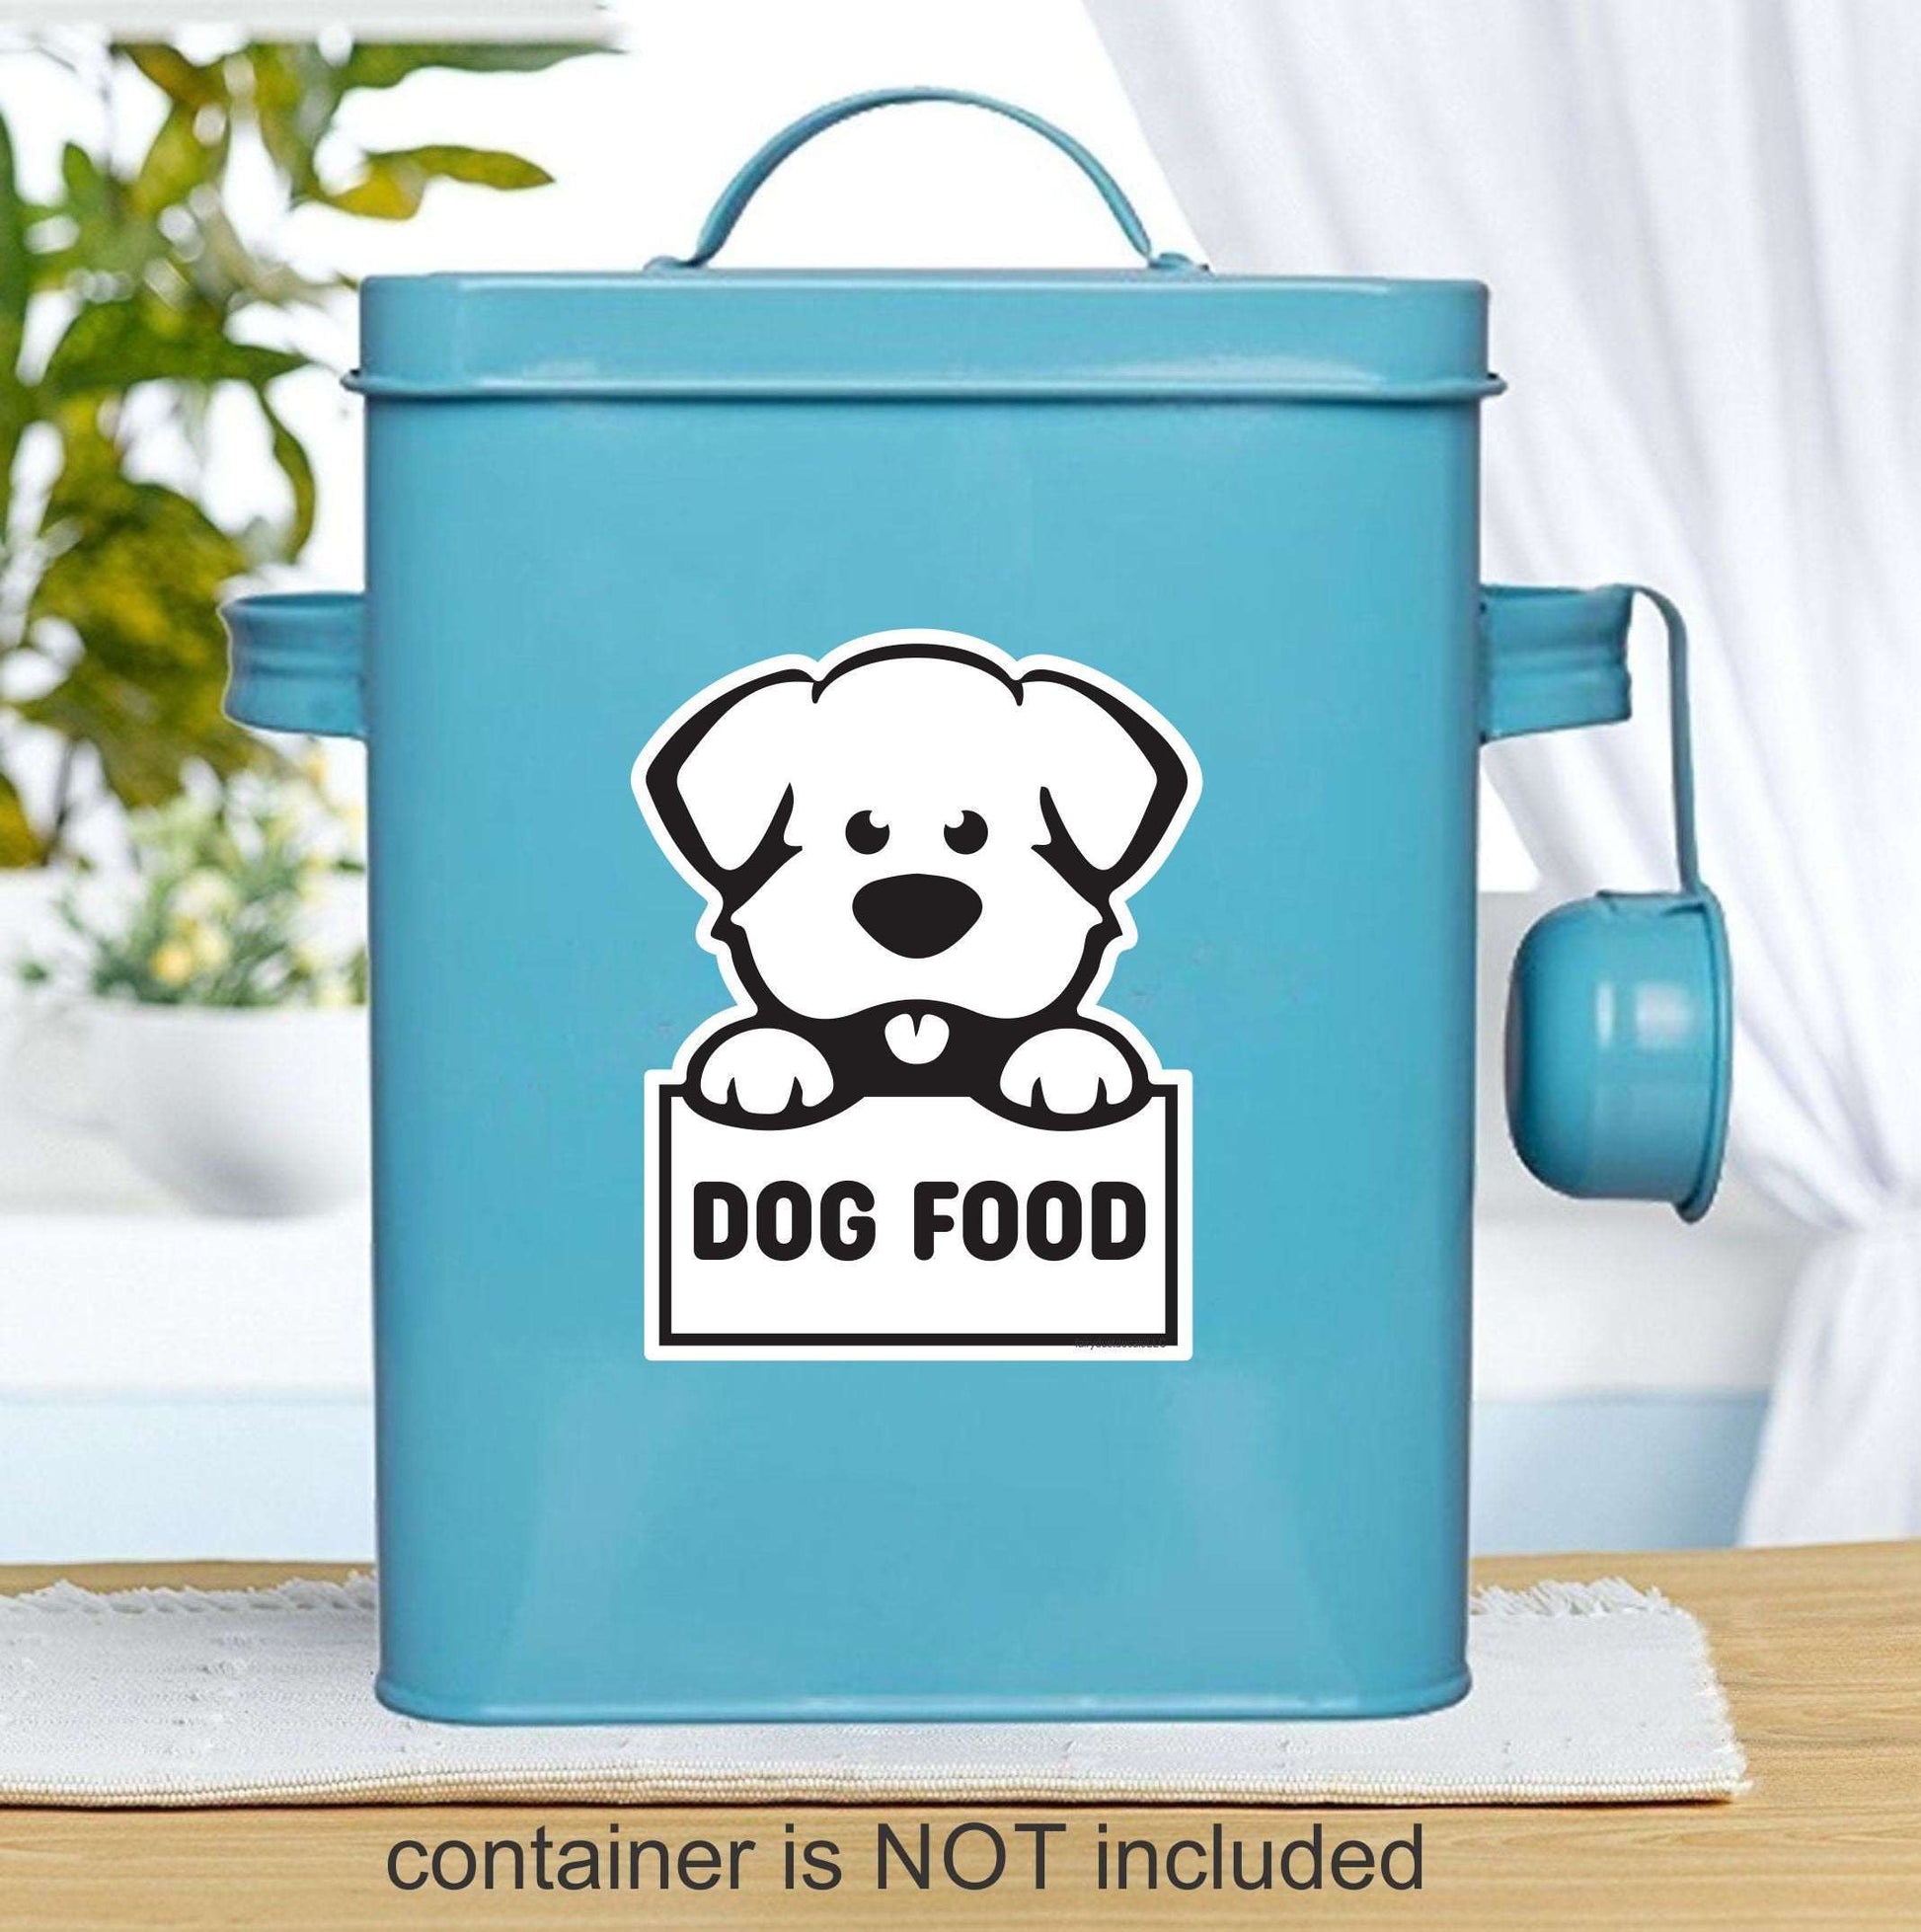 Dog Food Sticker, pet dry food storage label, organized home pantry, dog food container decal measures 5x4 inches